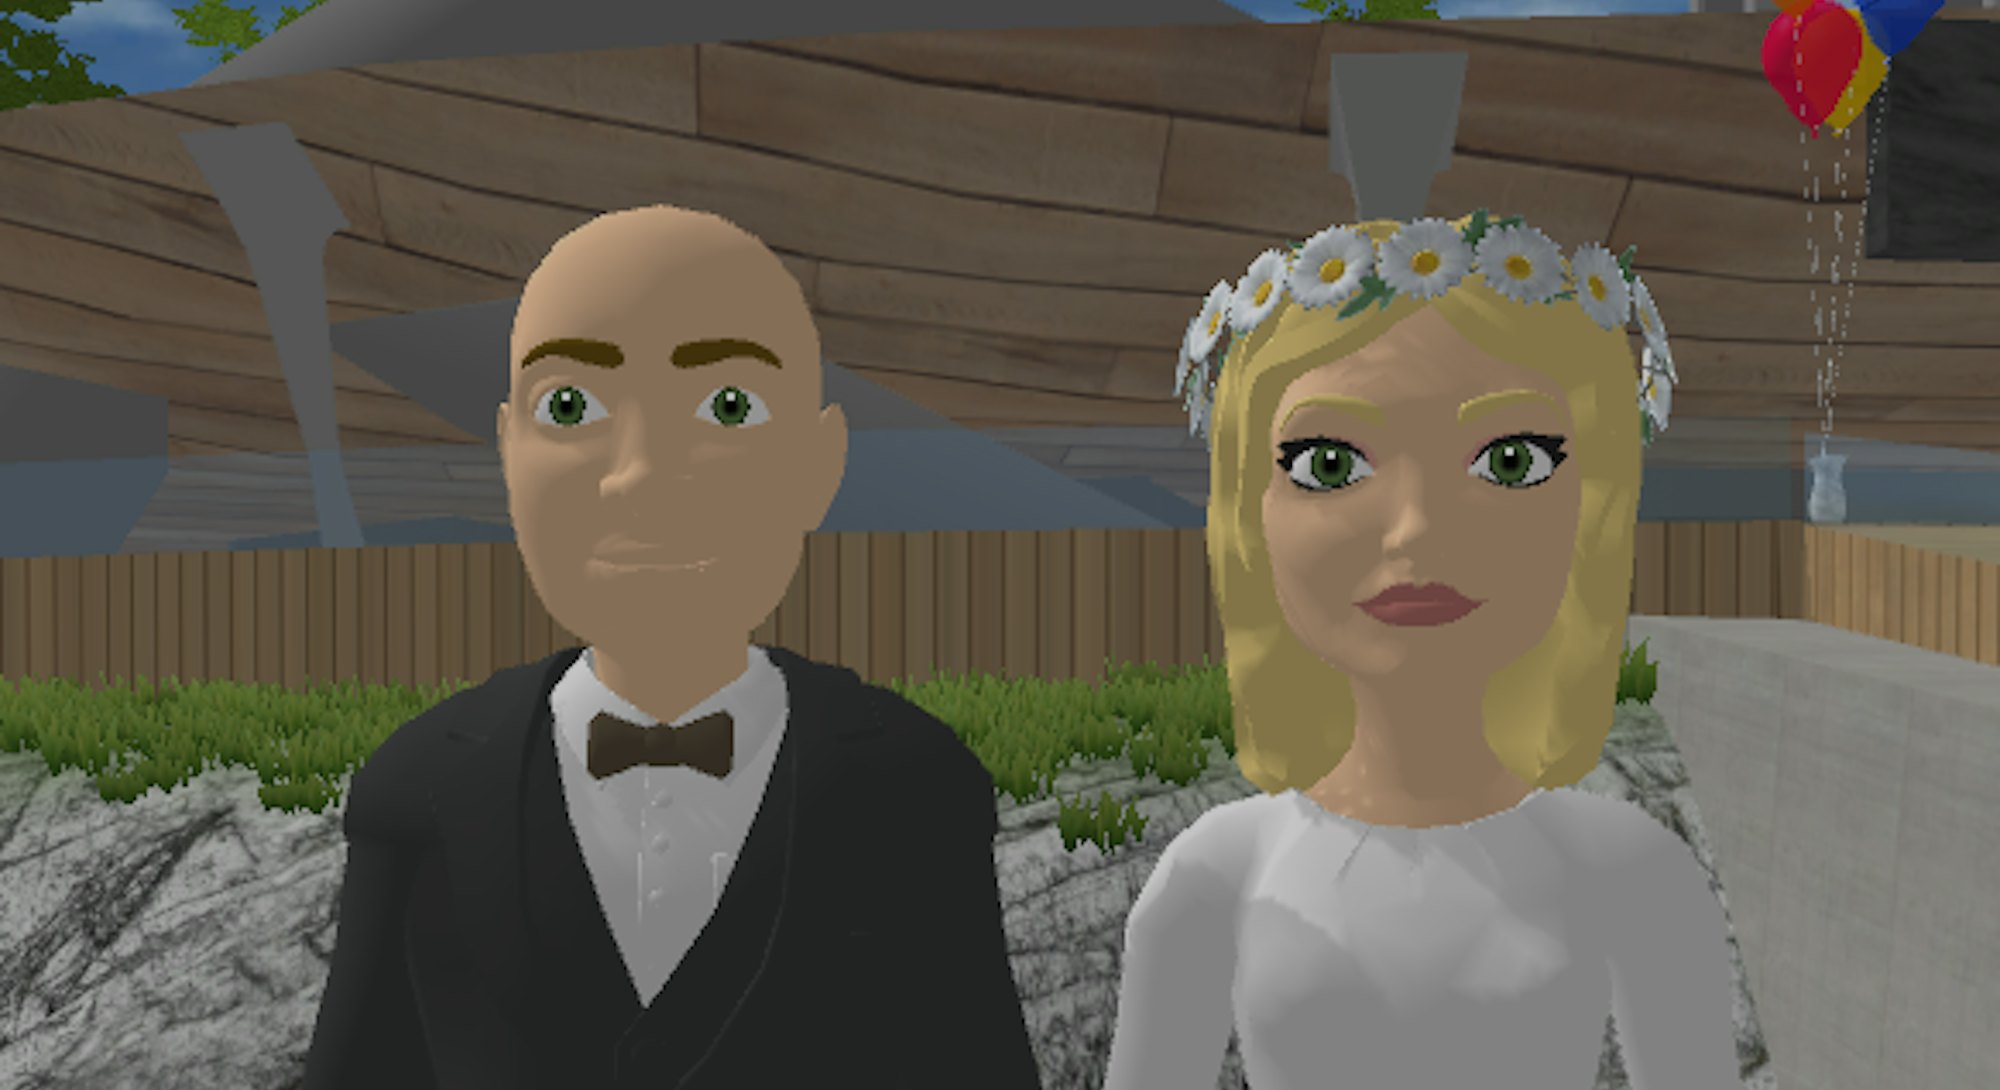 Traci and Dave Gagnon held a virtual wedding ceremony in the metaverse.